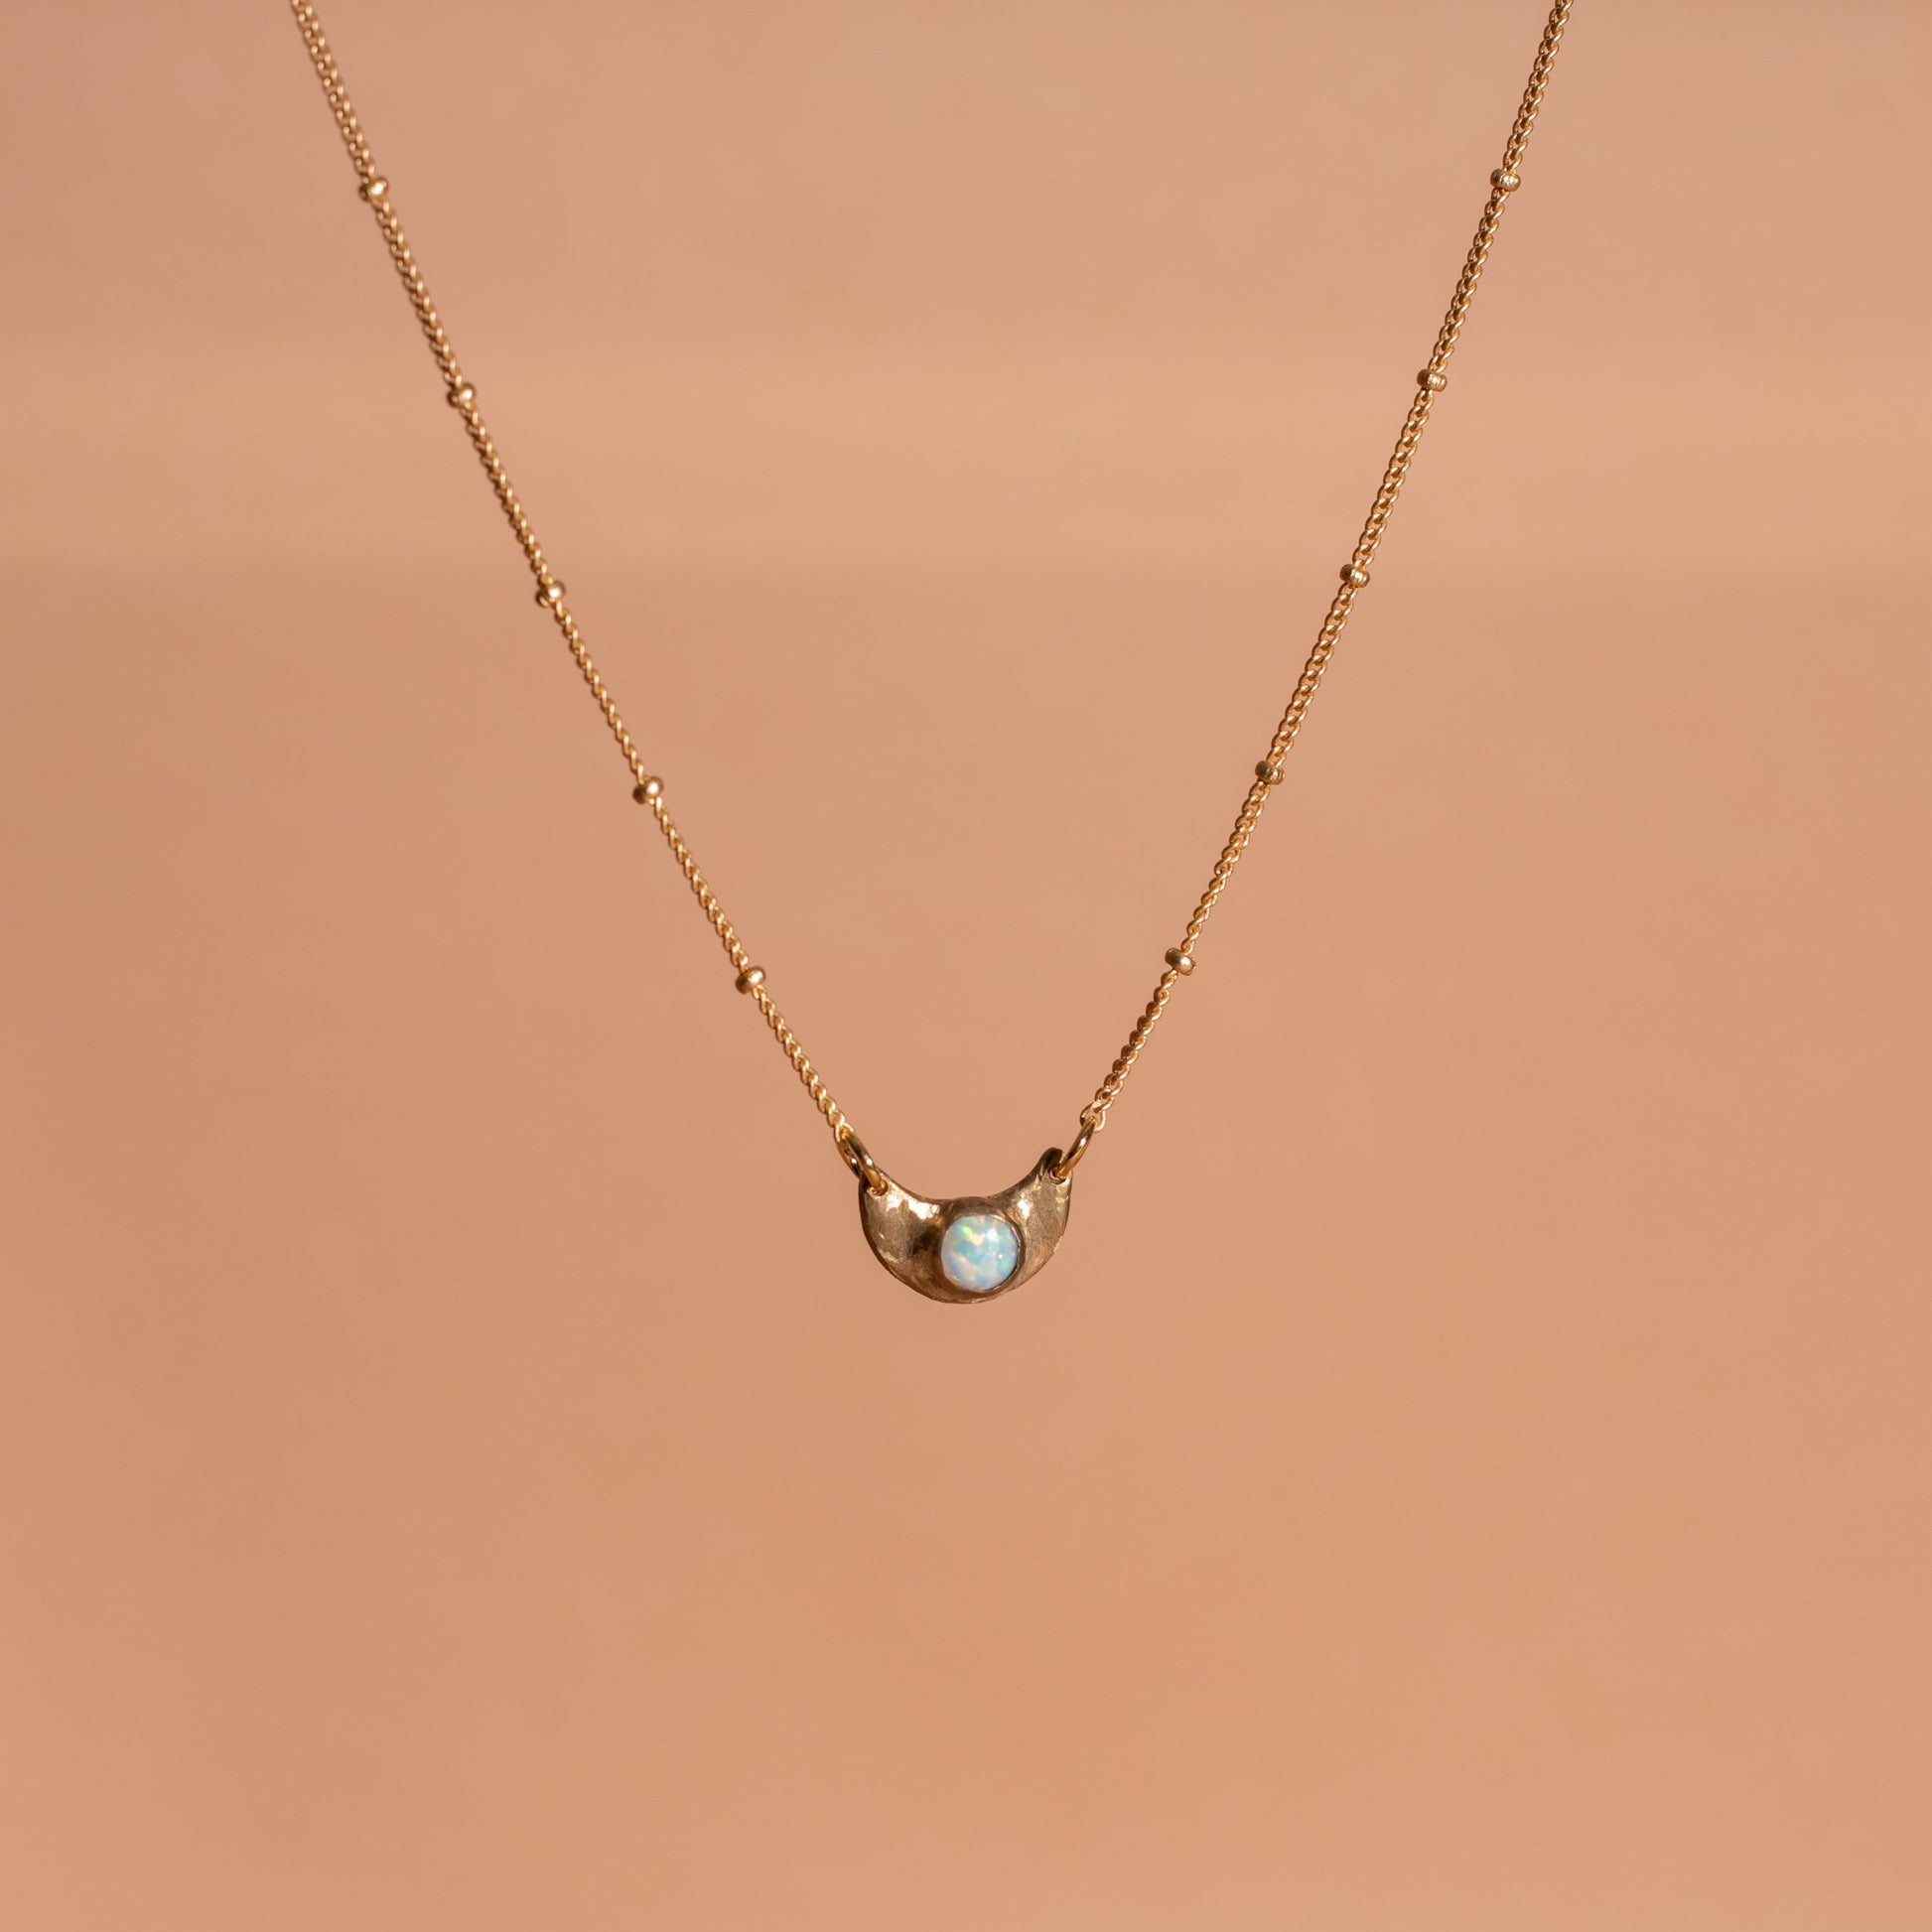 shiny gold toned Iron Oxide dainty moon necklace set with an opal gemstone